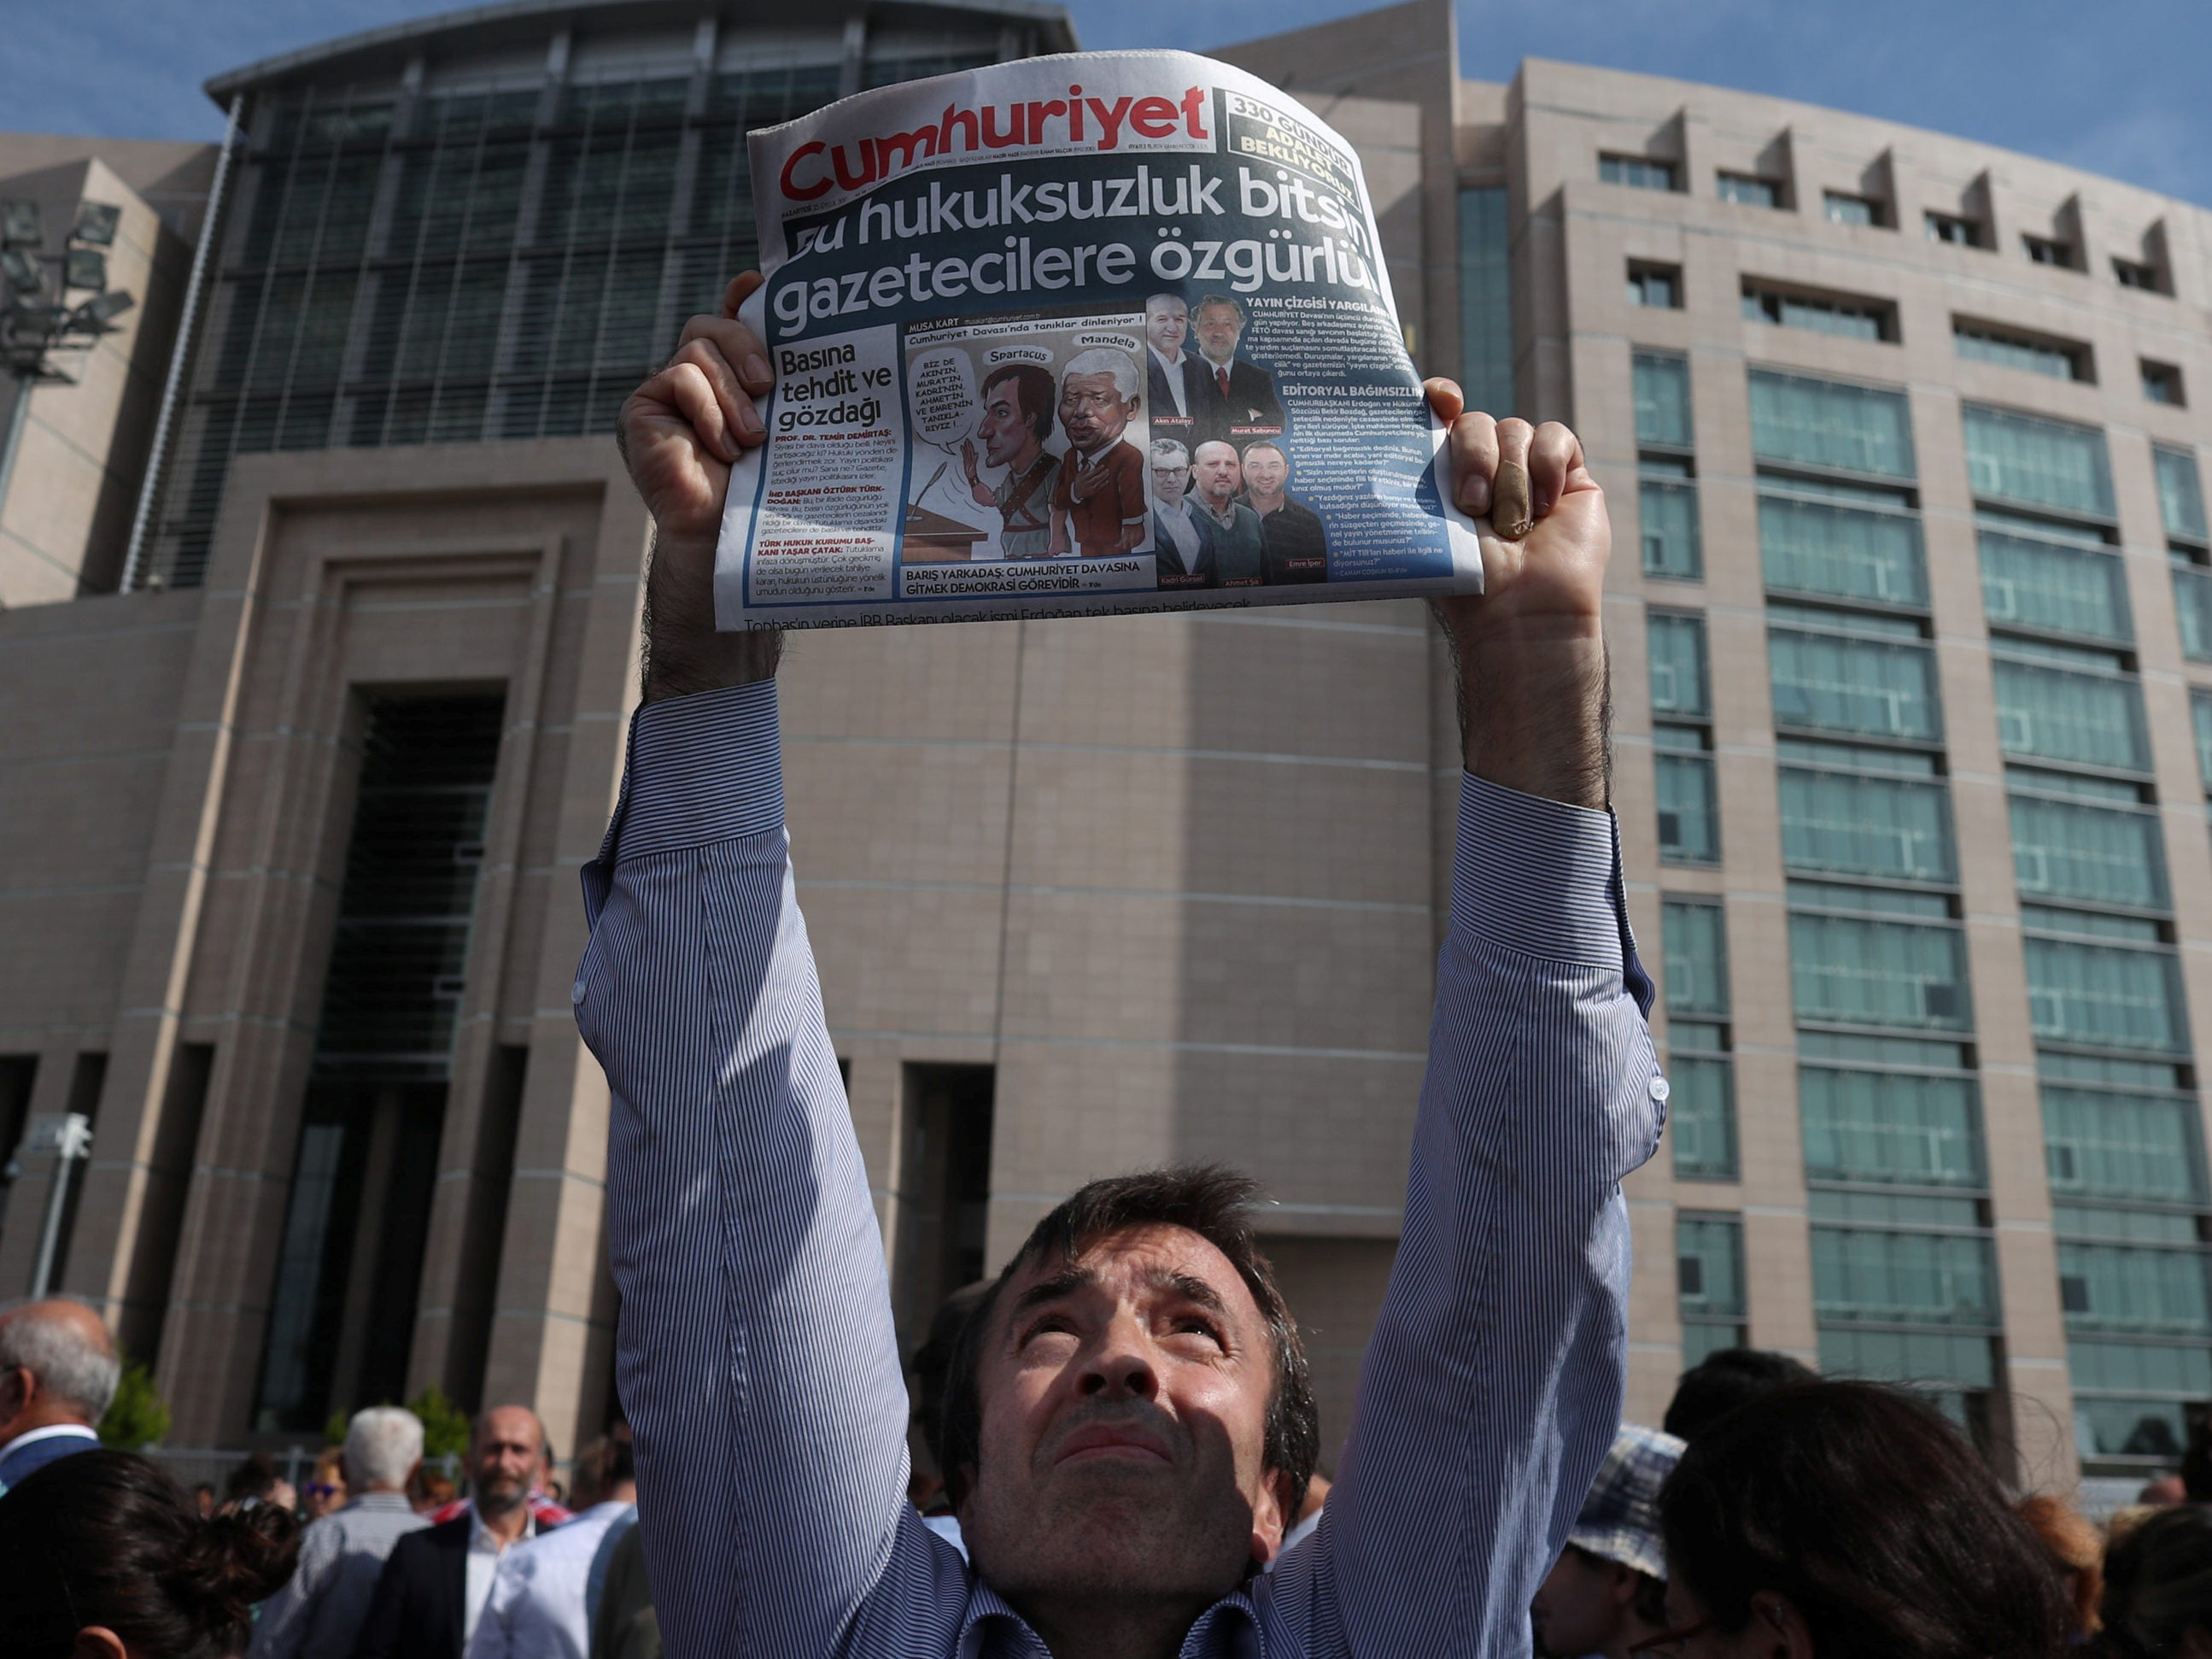 13 Turkish opposition newspaper staff convicted of terrorism offences after trial ‘aimed at silencing’ their reporting